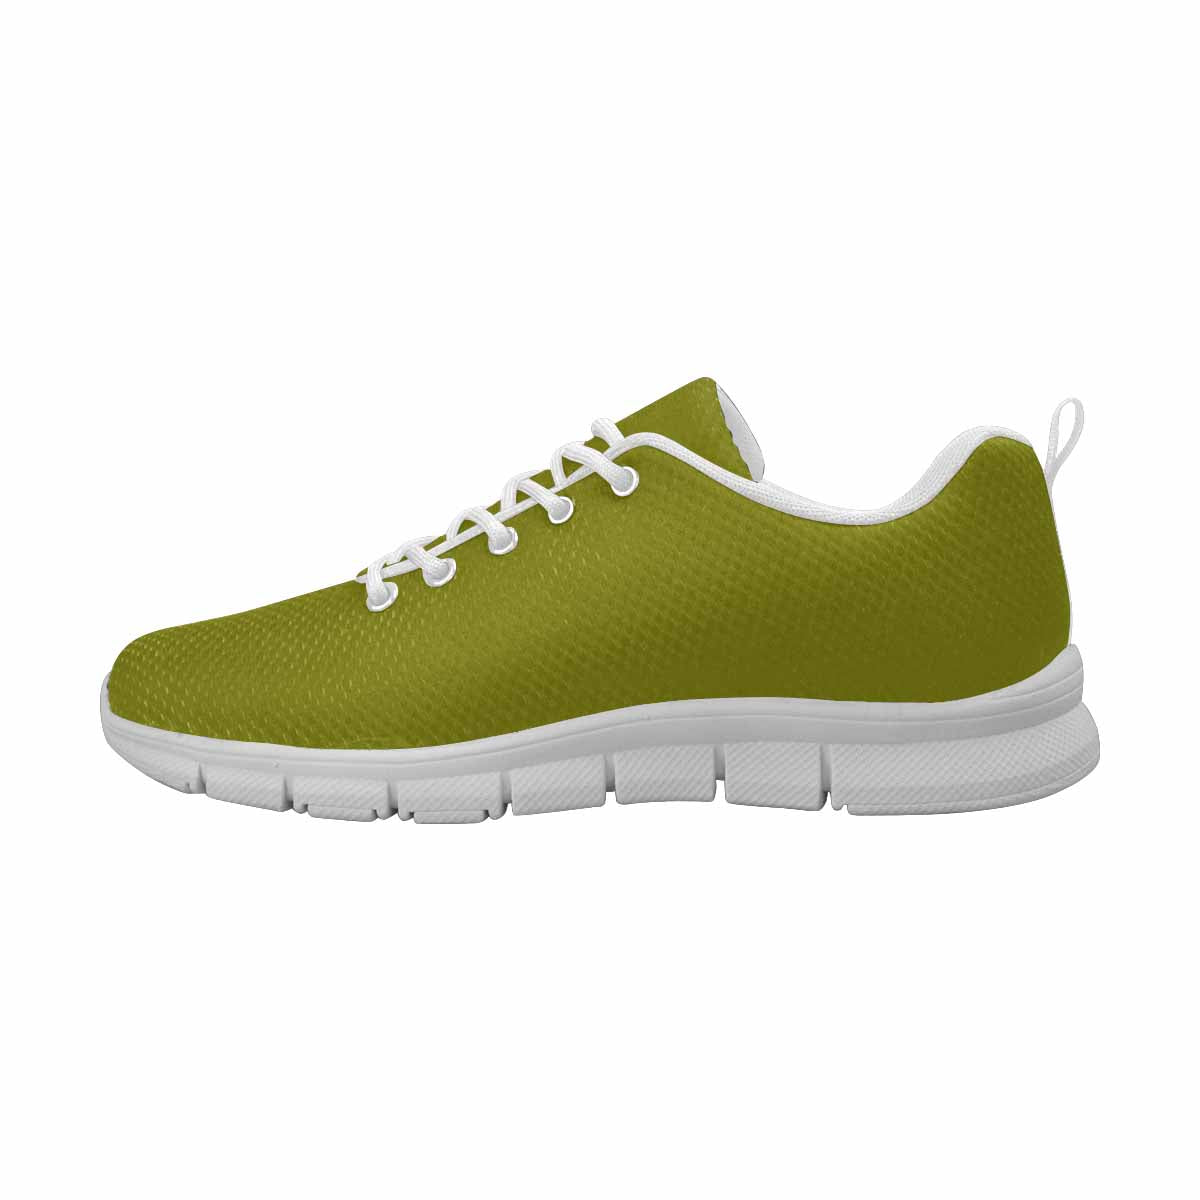 Sneakers For Men,    Dark Olive Green   - Running Shoes